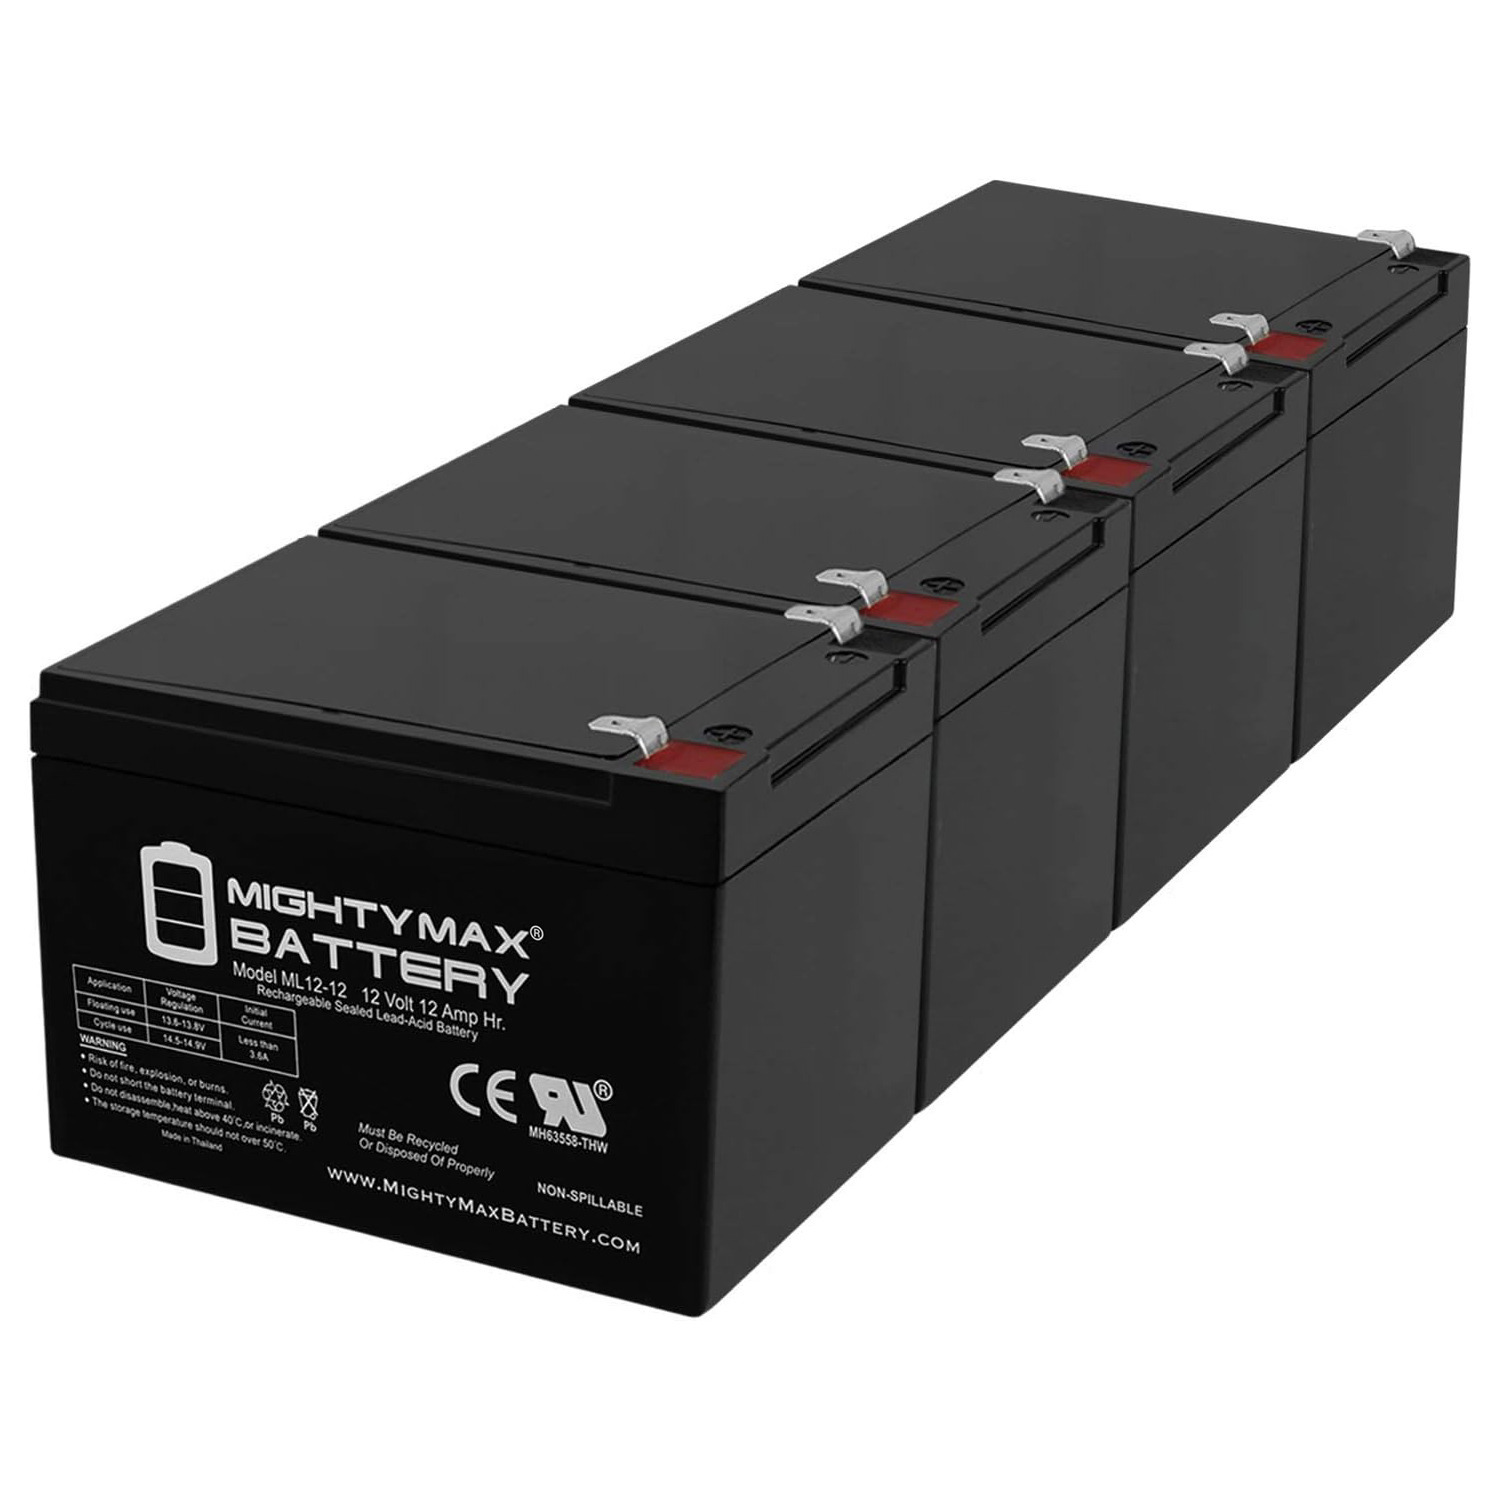 12V 12Ah F2 Lead Acid Replacement Battery compatible with Belkin F6C1000ei-TW-RK - 4 Pack